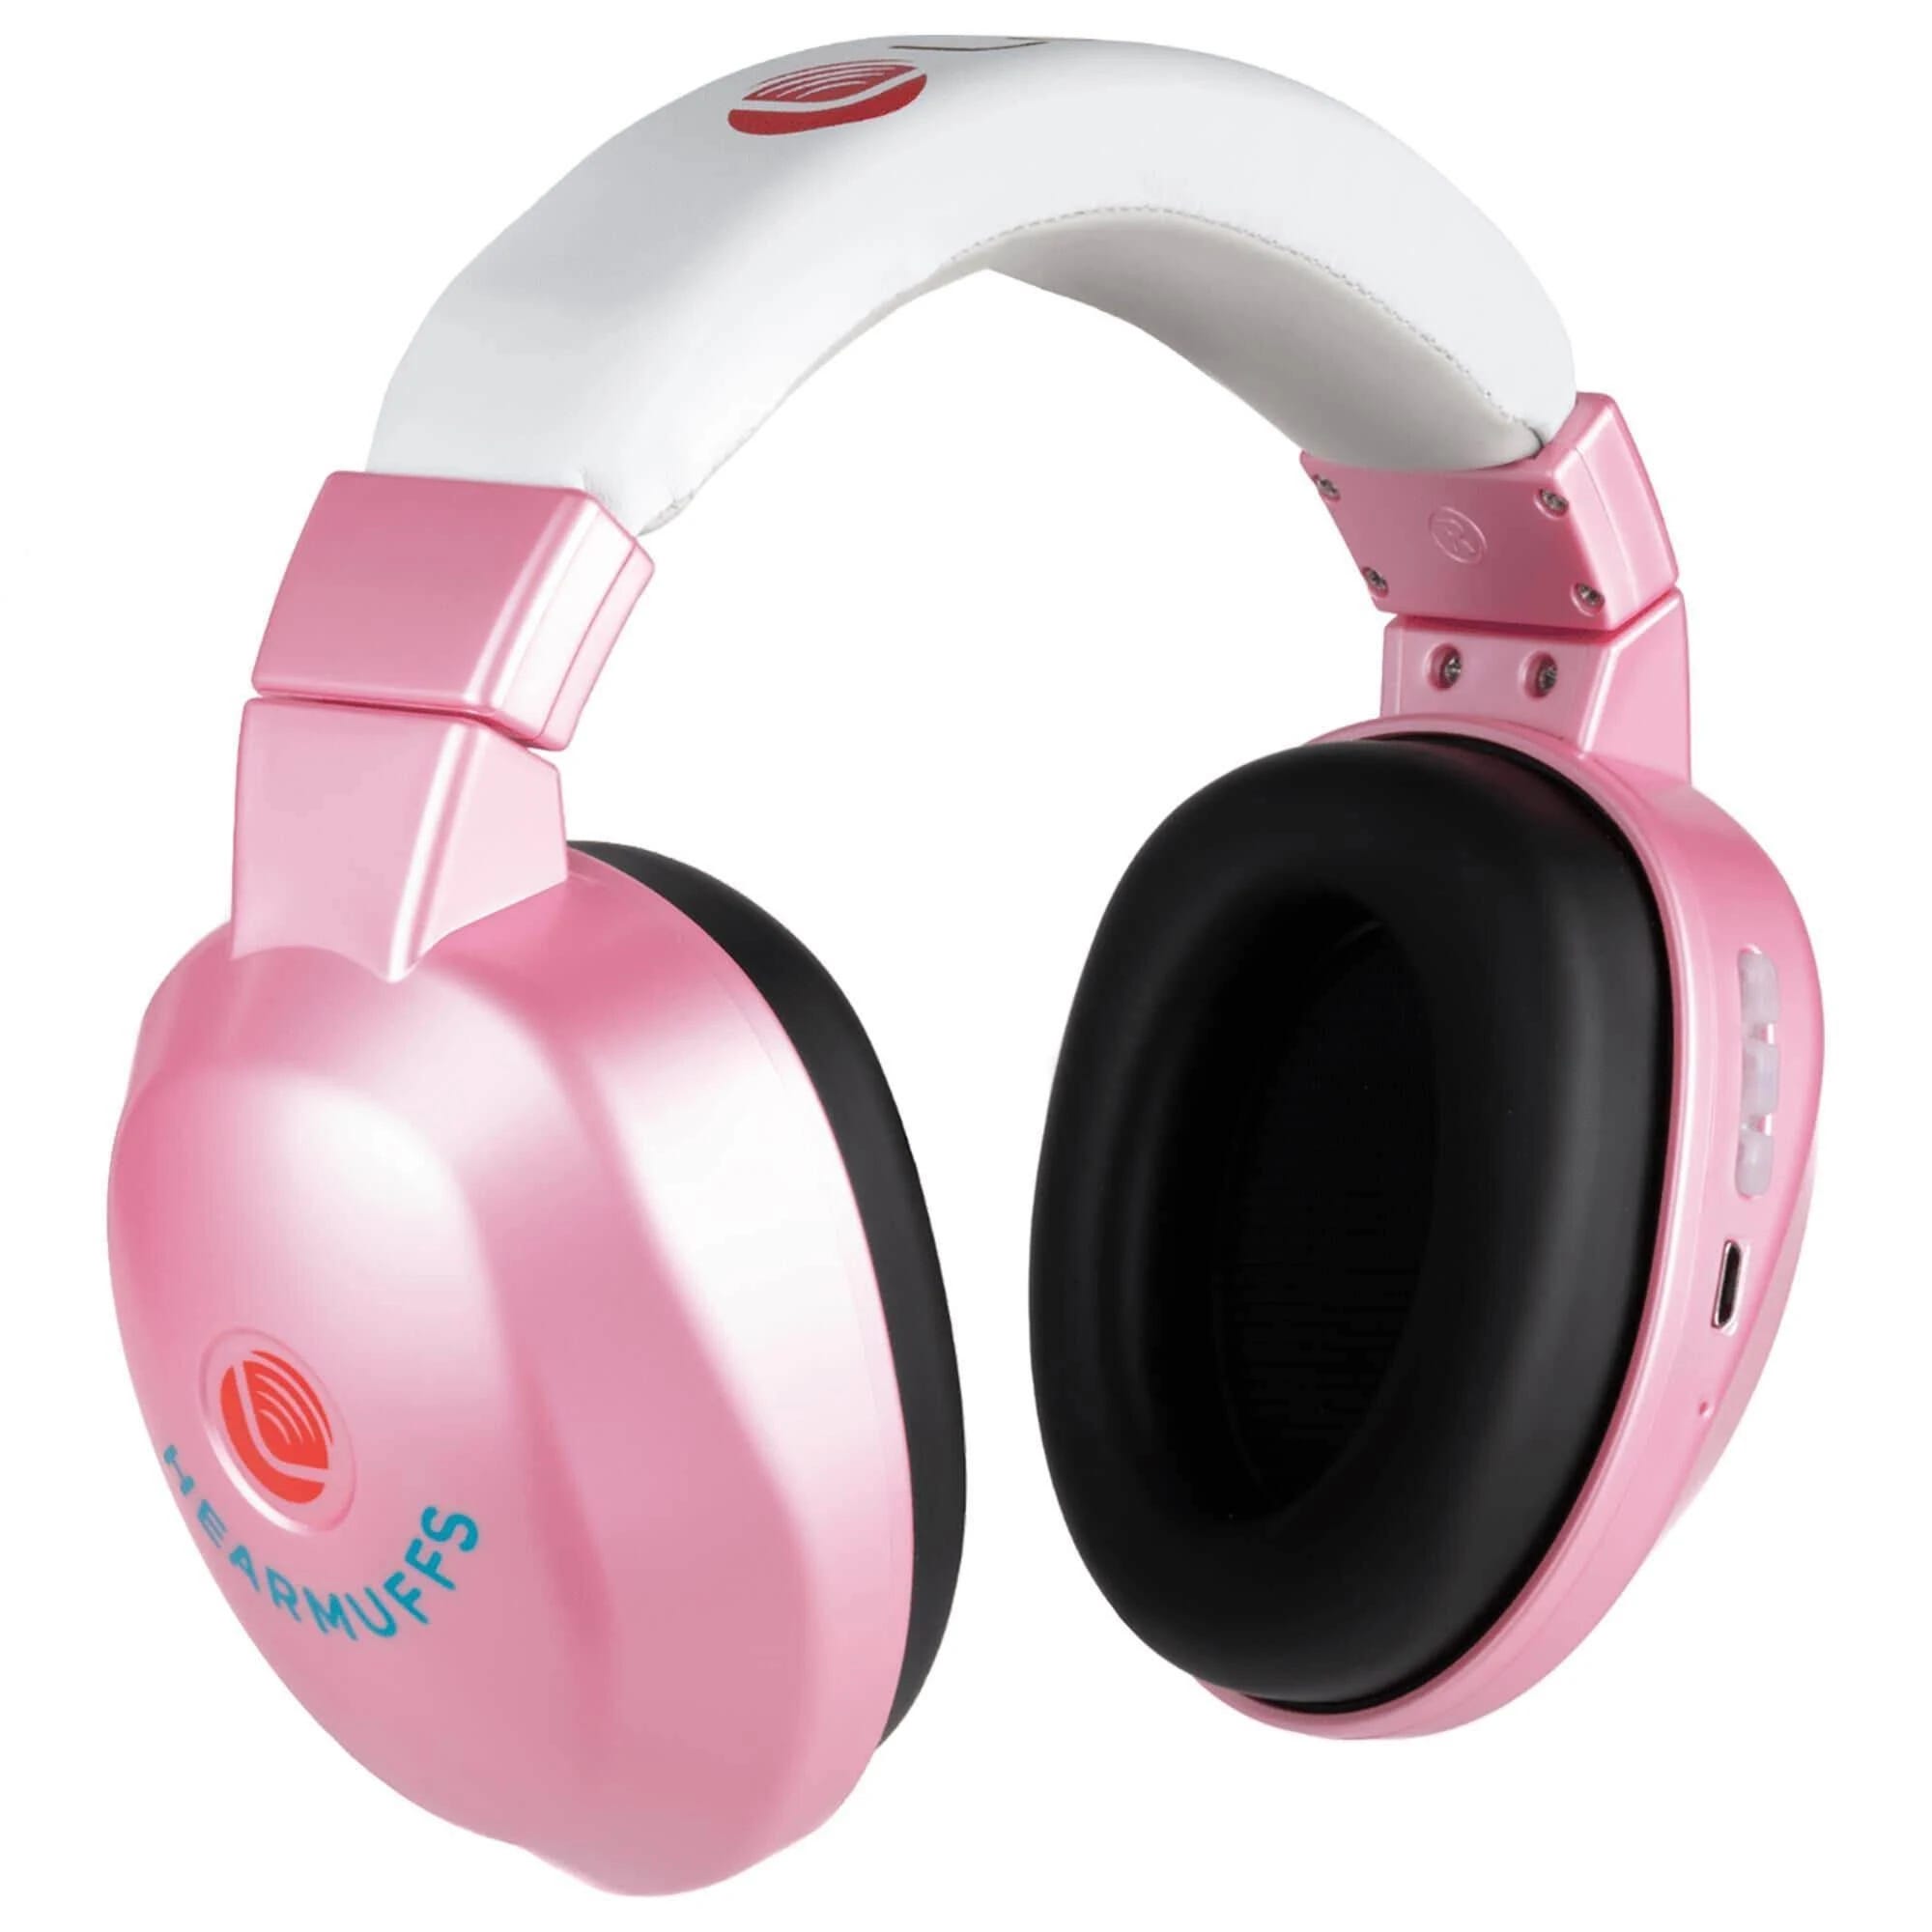 Little Ears Protect Headphones: Wireless Infant Headset for Noise Reduction & Safe Listening | Image